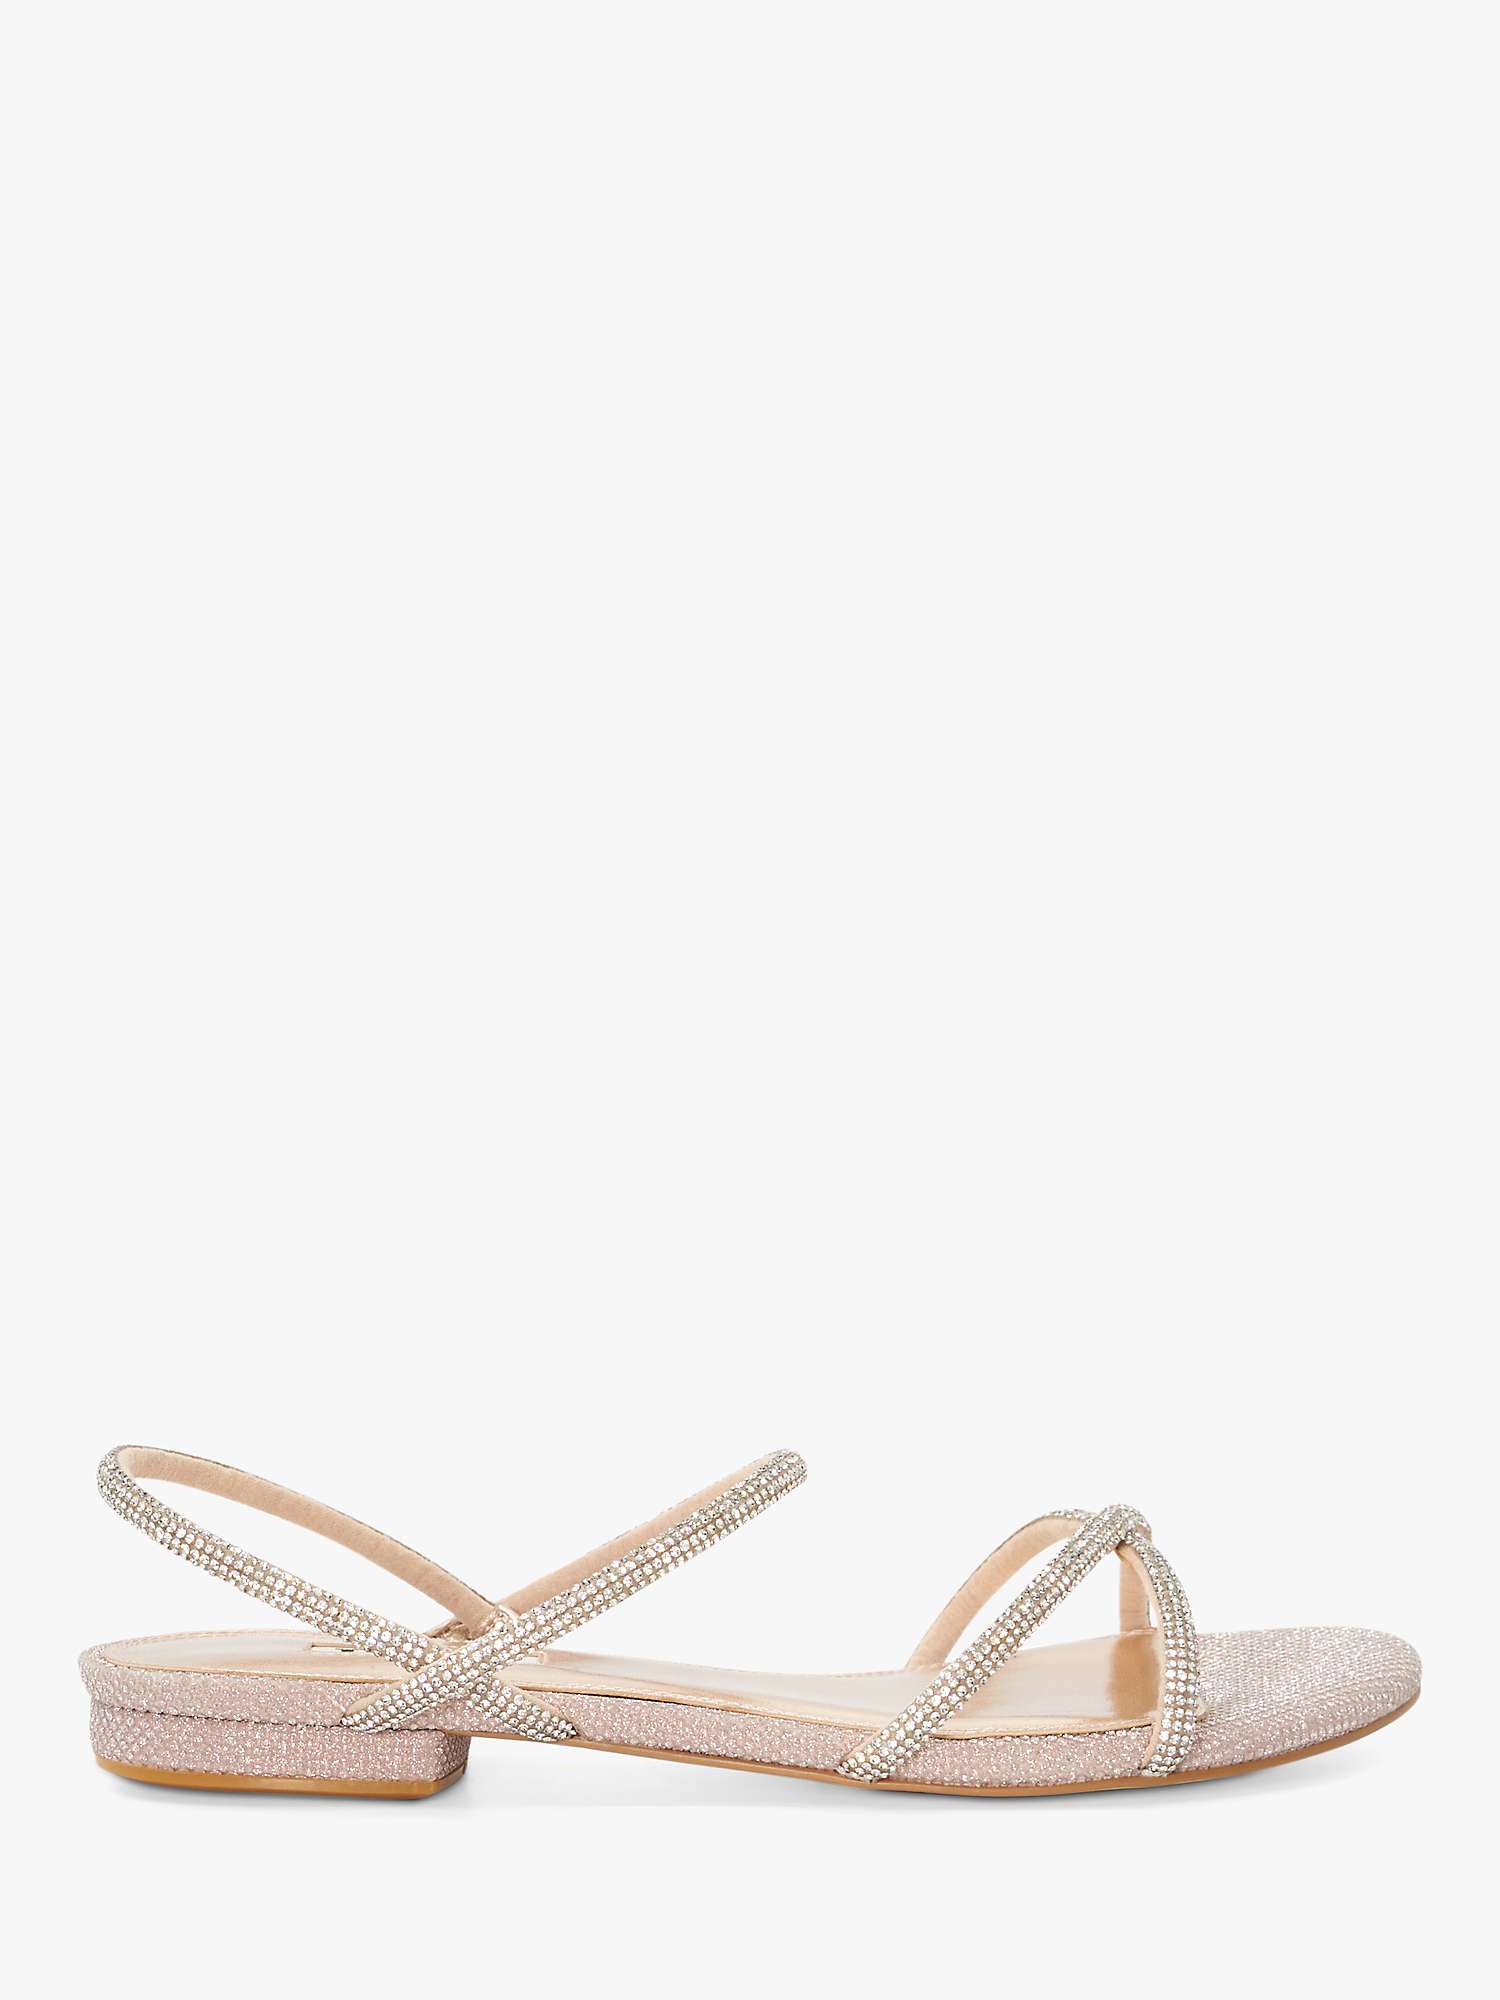 Buy Dune Wide Fit Nightengale Embellished Strappy Sandals, Rose Gold Online at johnlewis.com